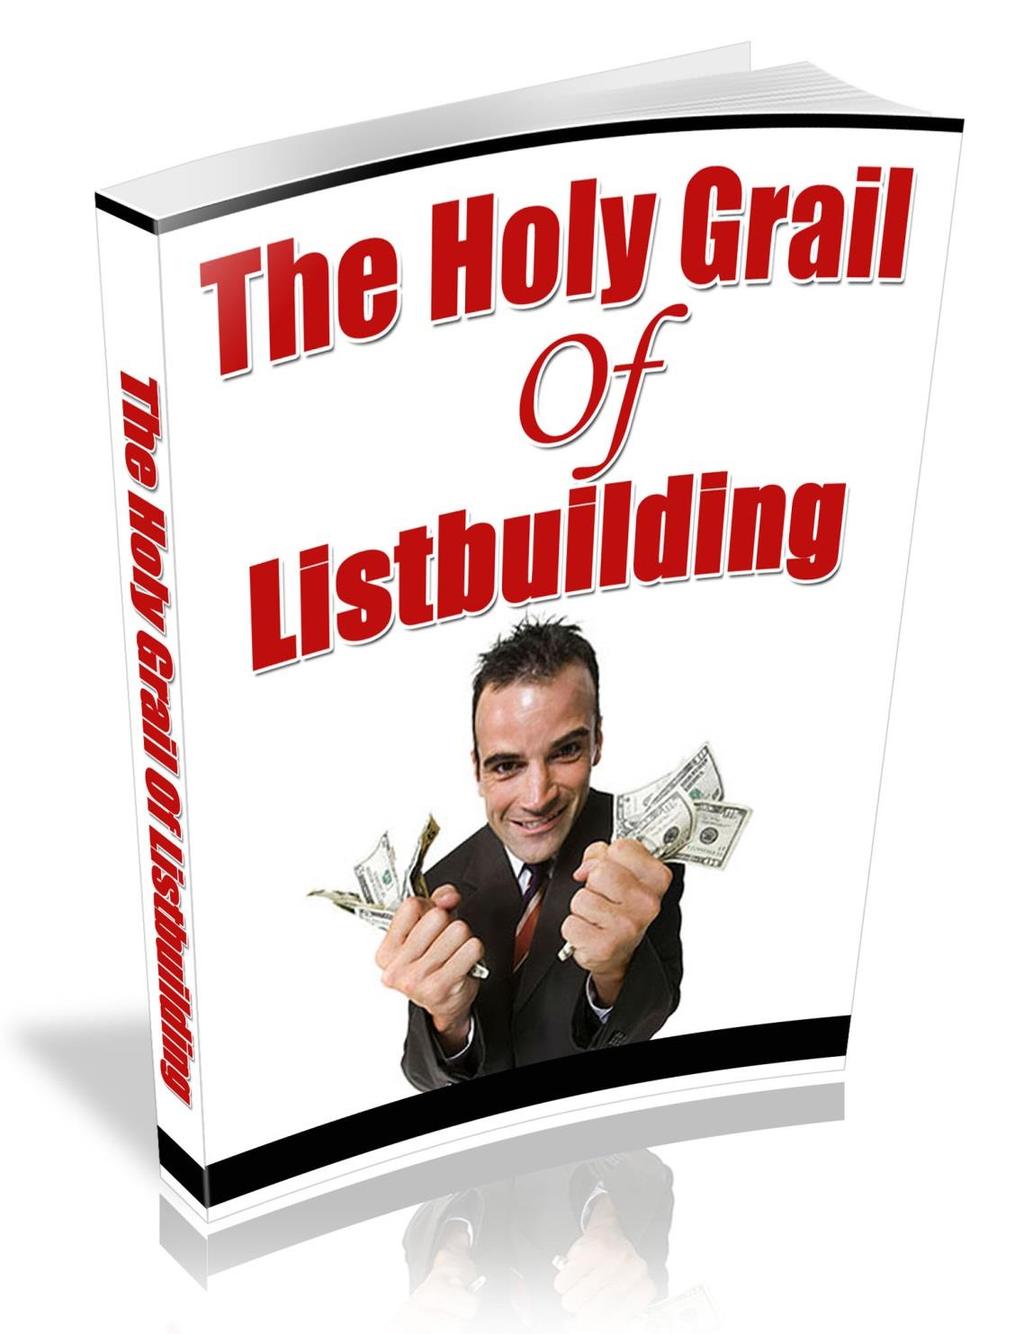 Welcome To The Holy Grail Of Listbuilding The content within this report is for personal use only, you